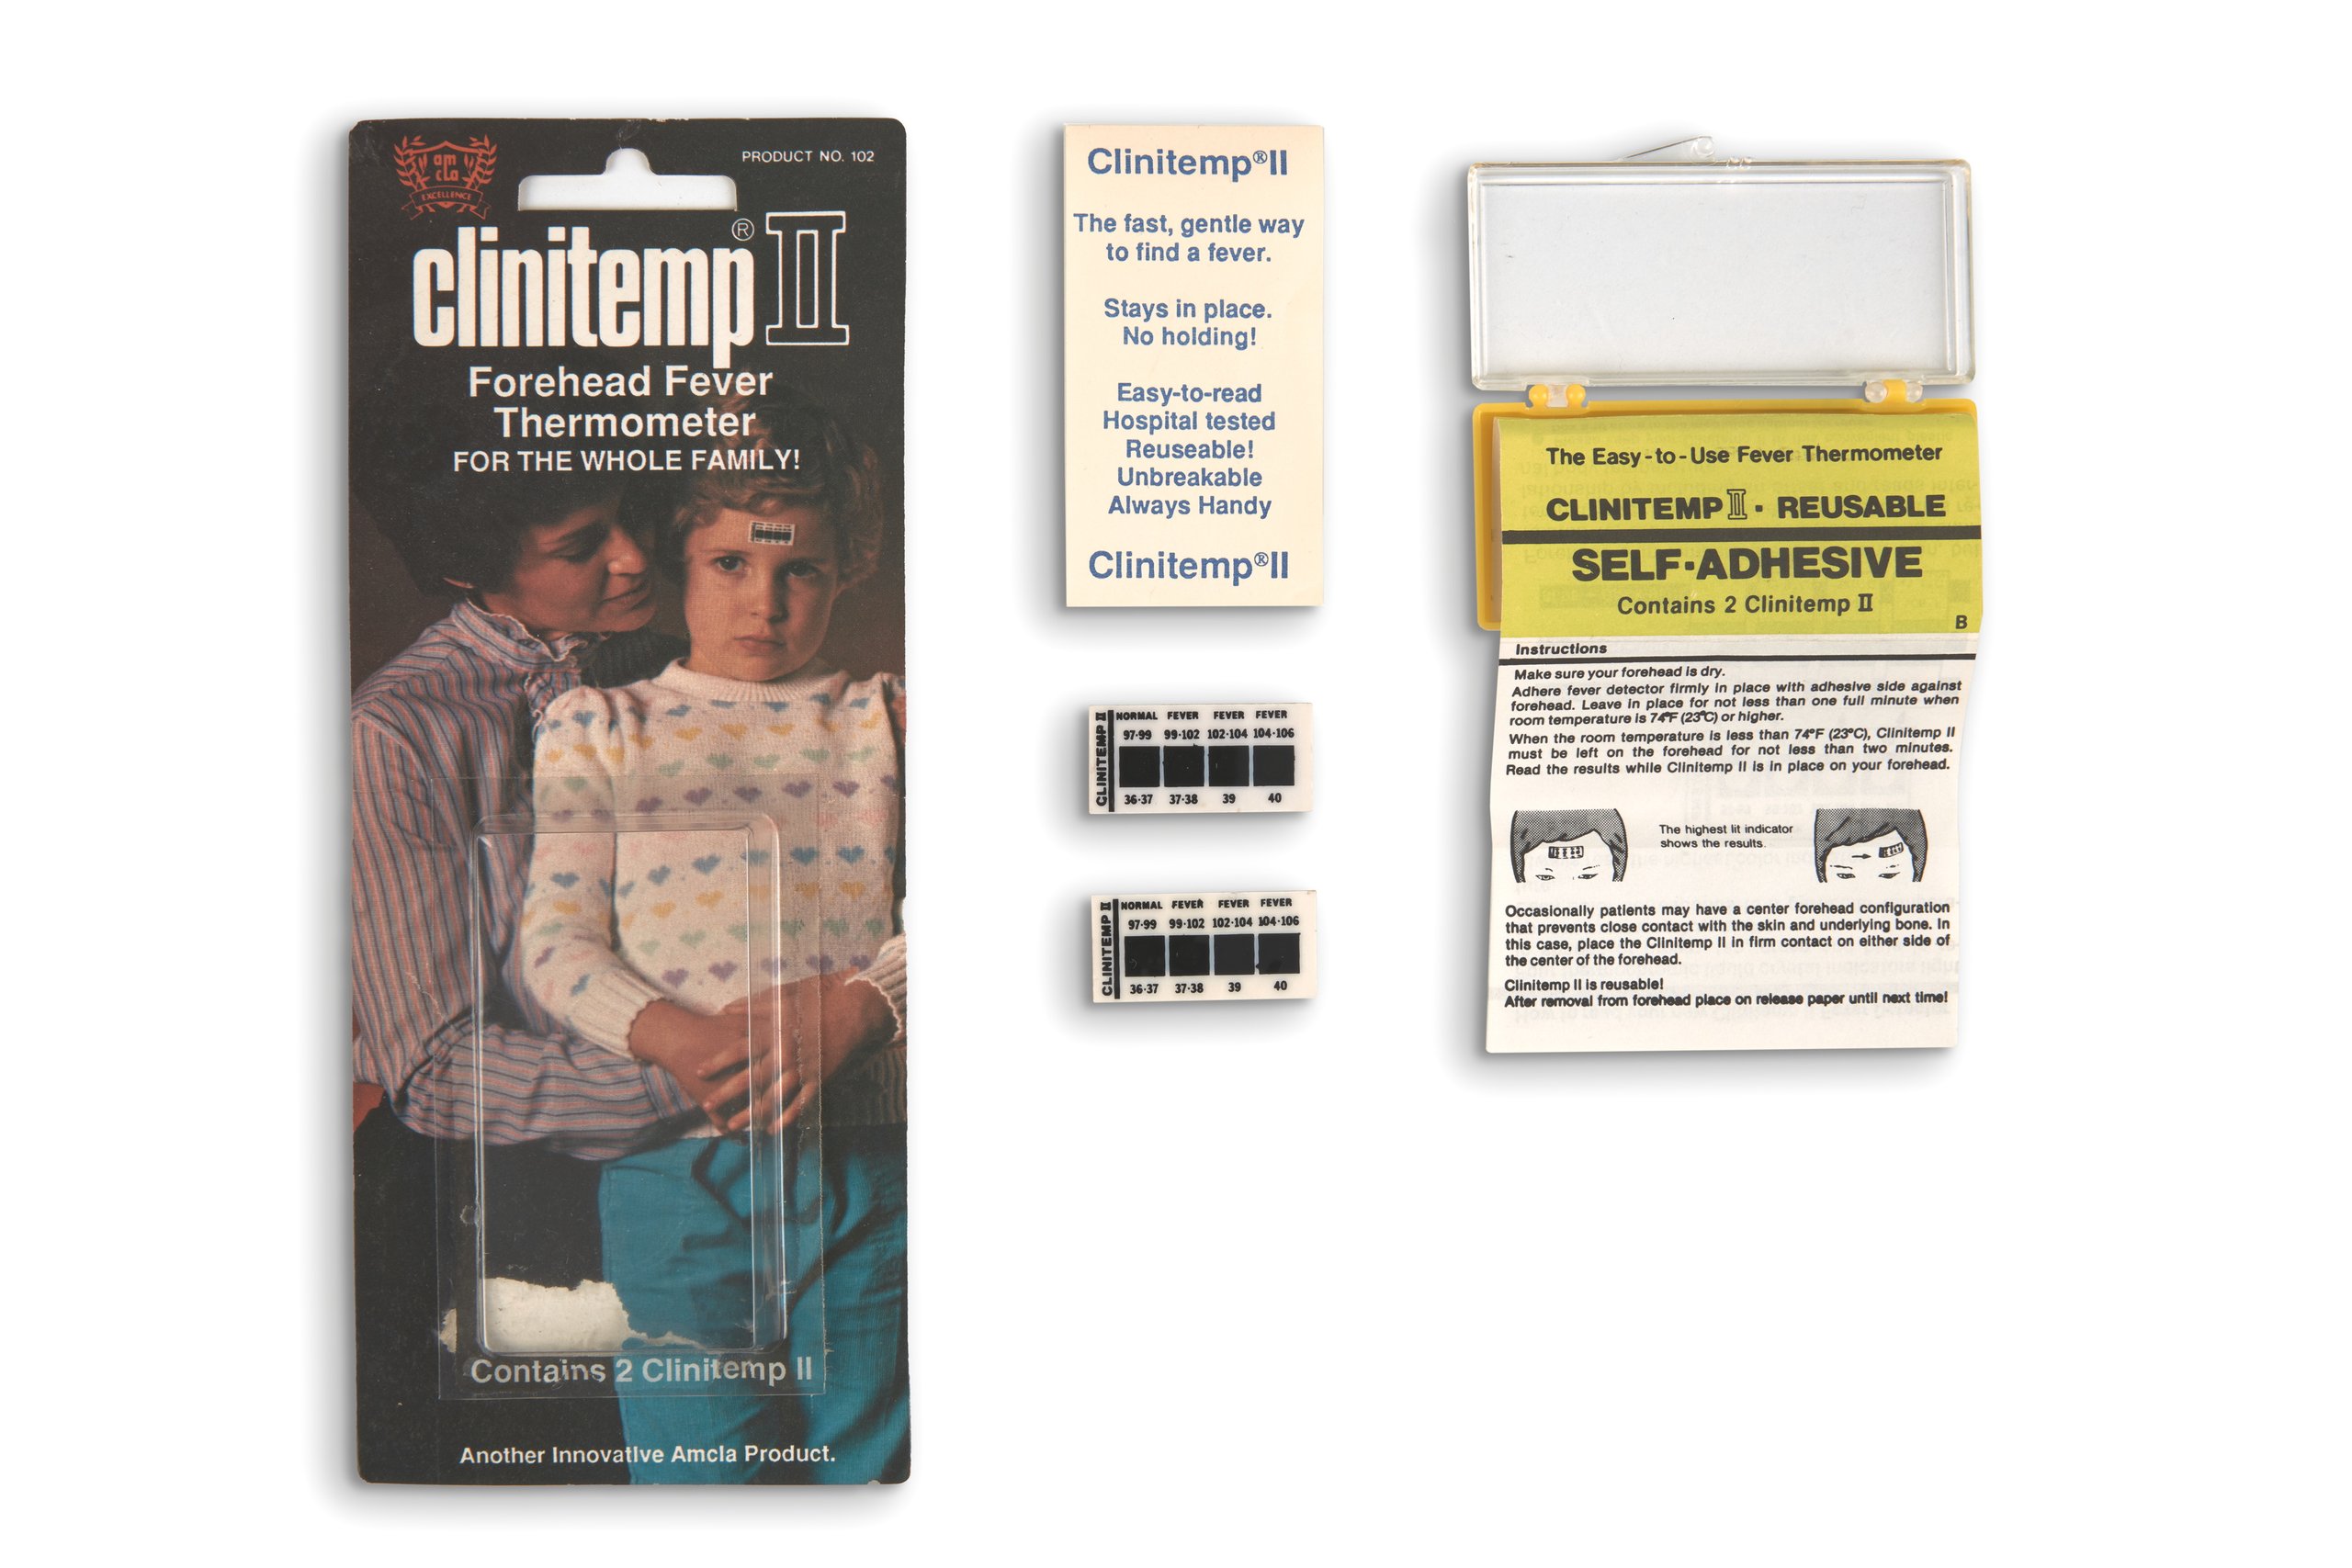 Clinitemp II thermometers with packaging